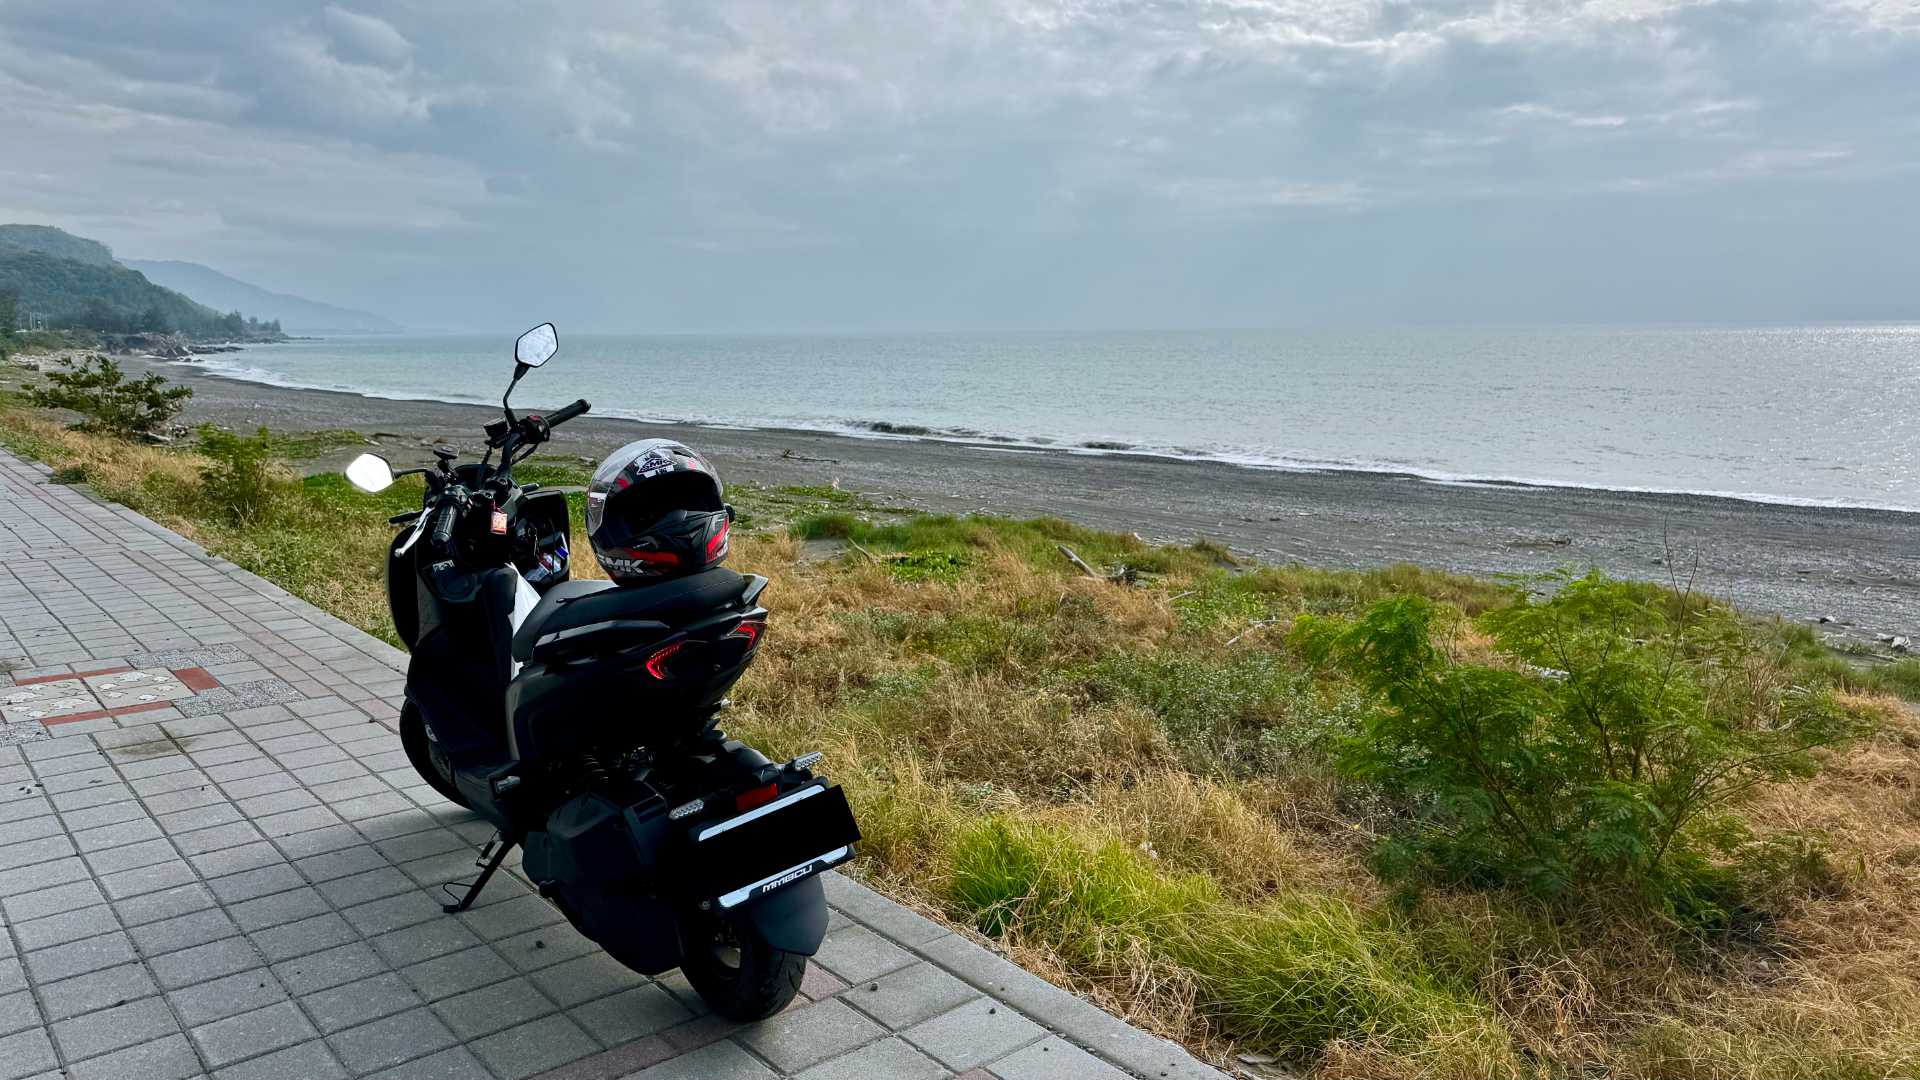 A scooter parked on a tiled path next to a stony beach and a calm sea.